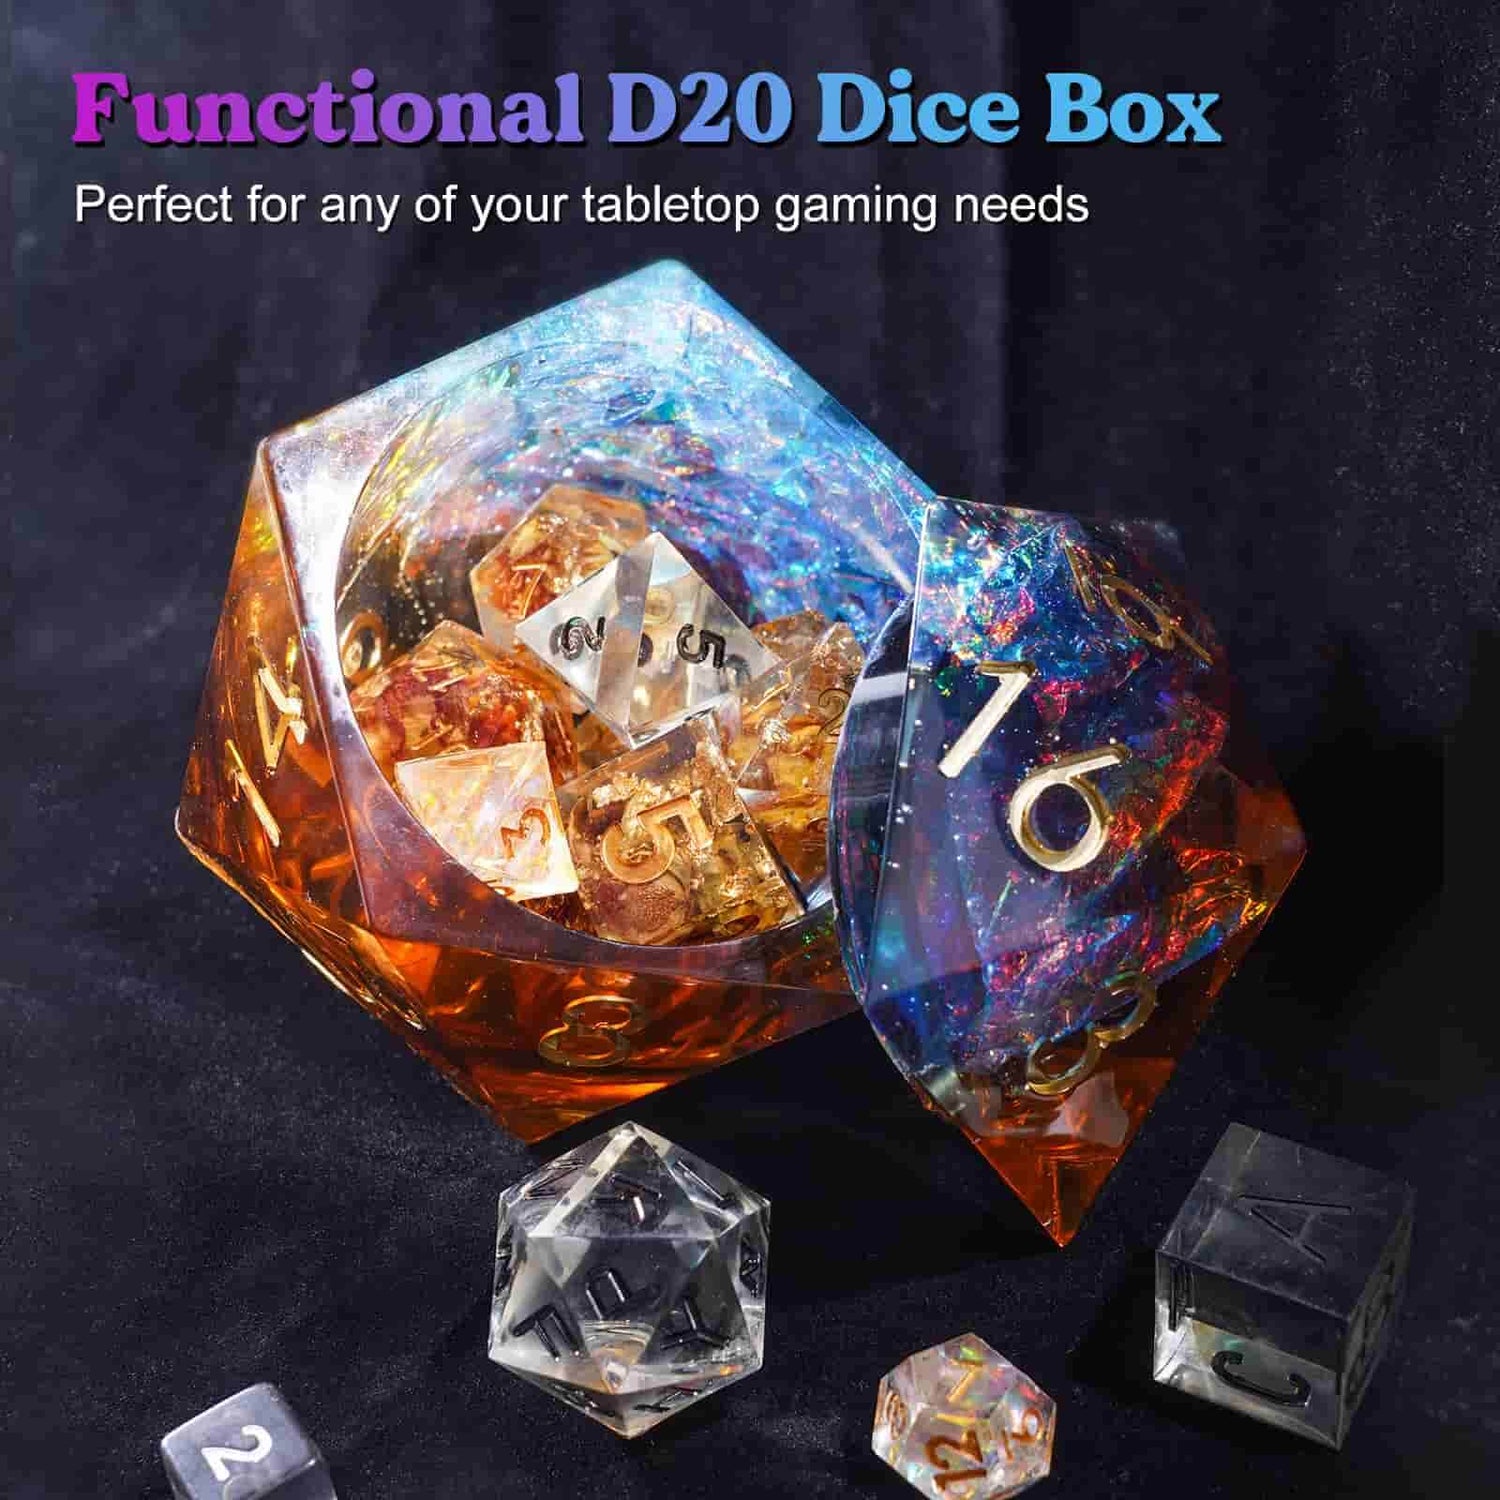 D20 Dice Box Molds – Let's Resin